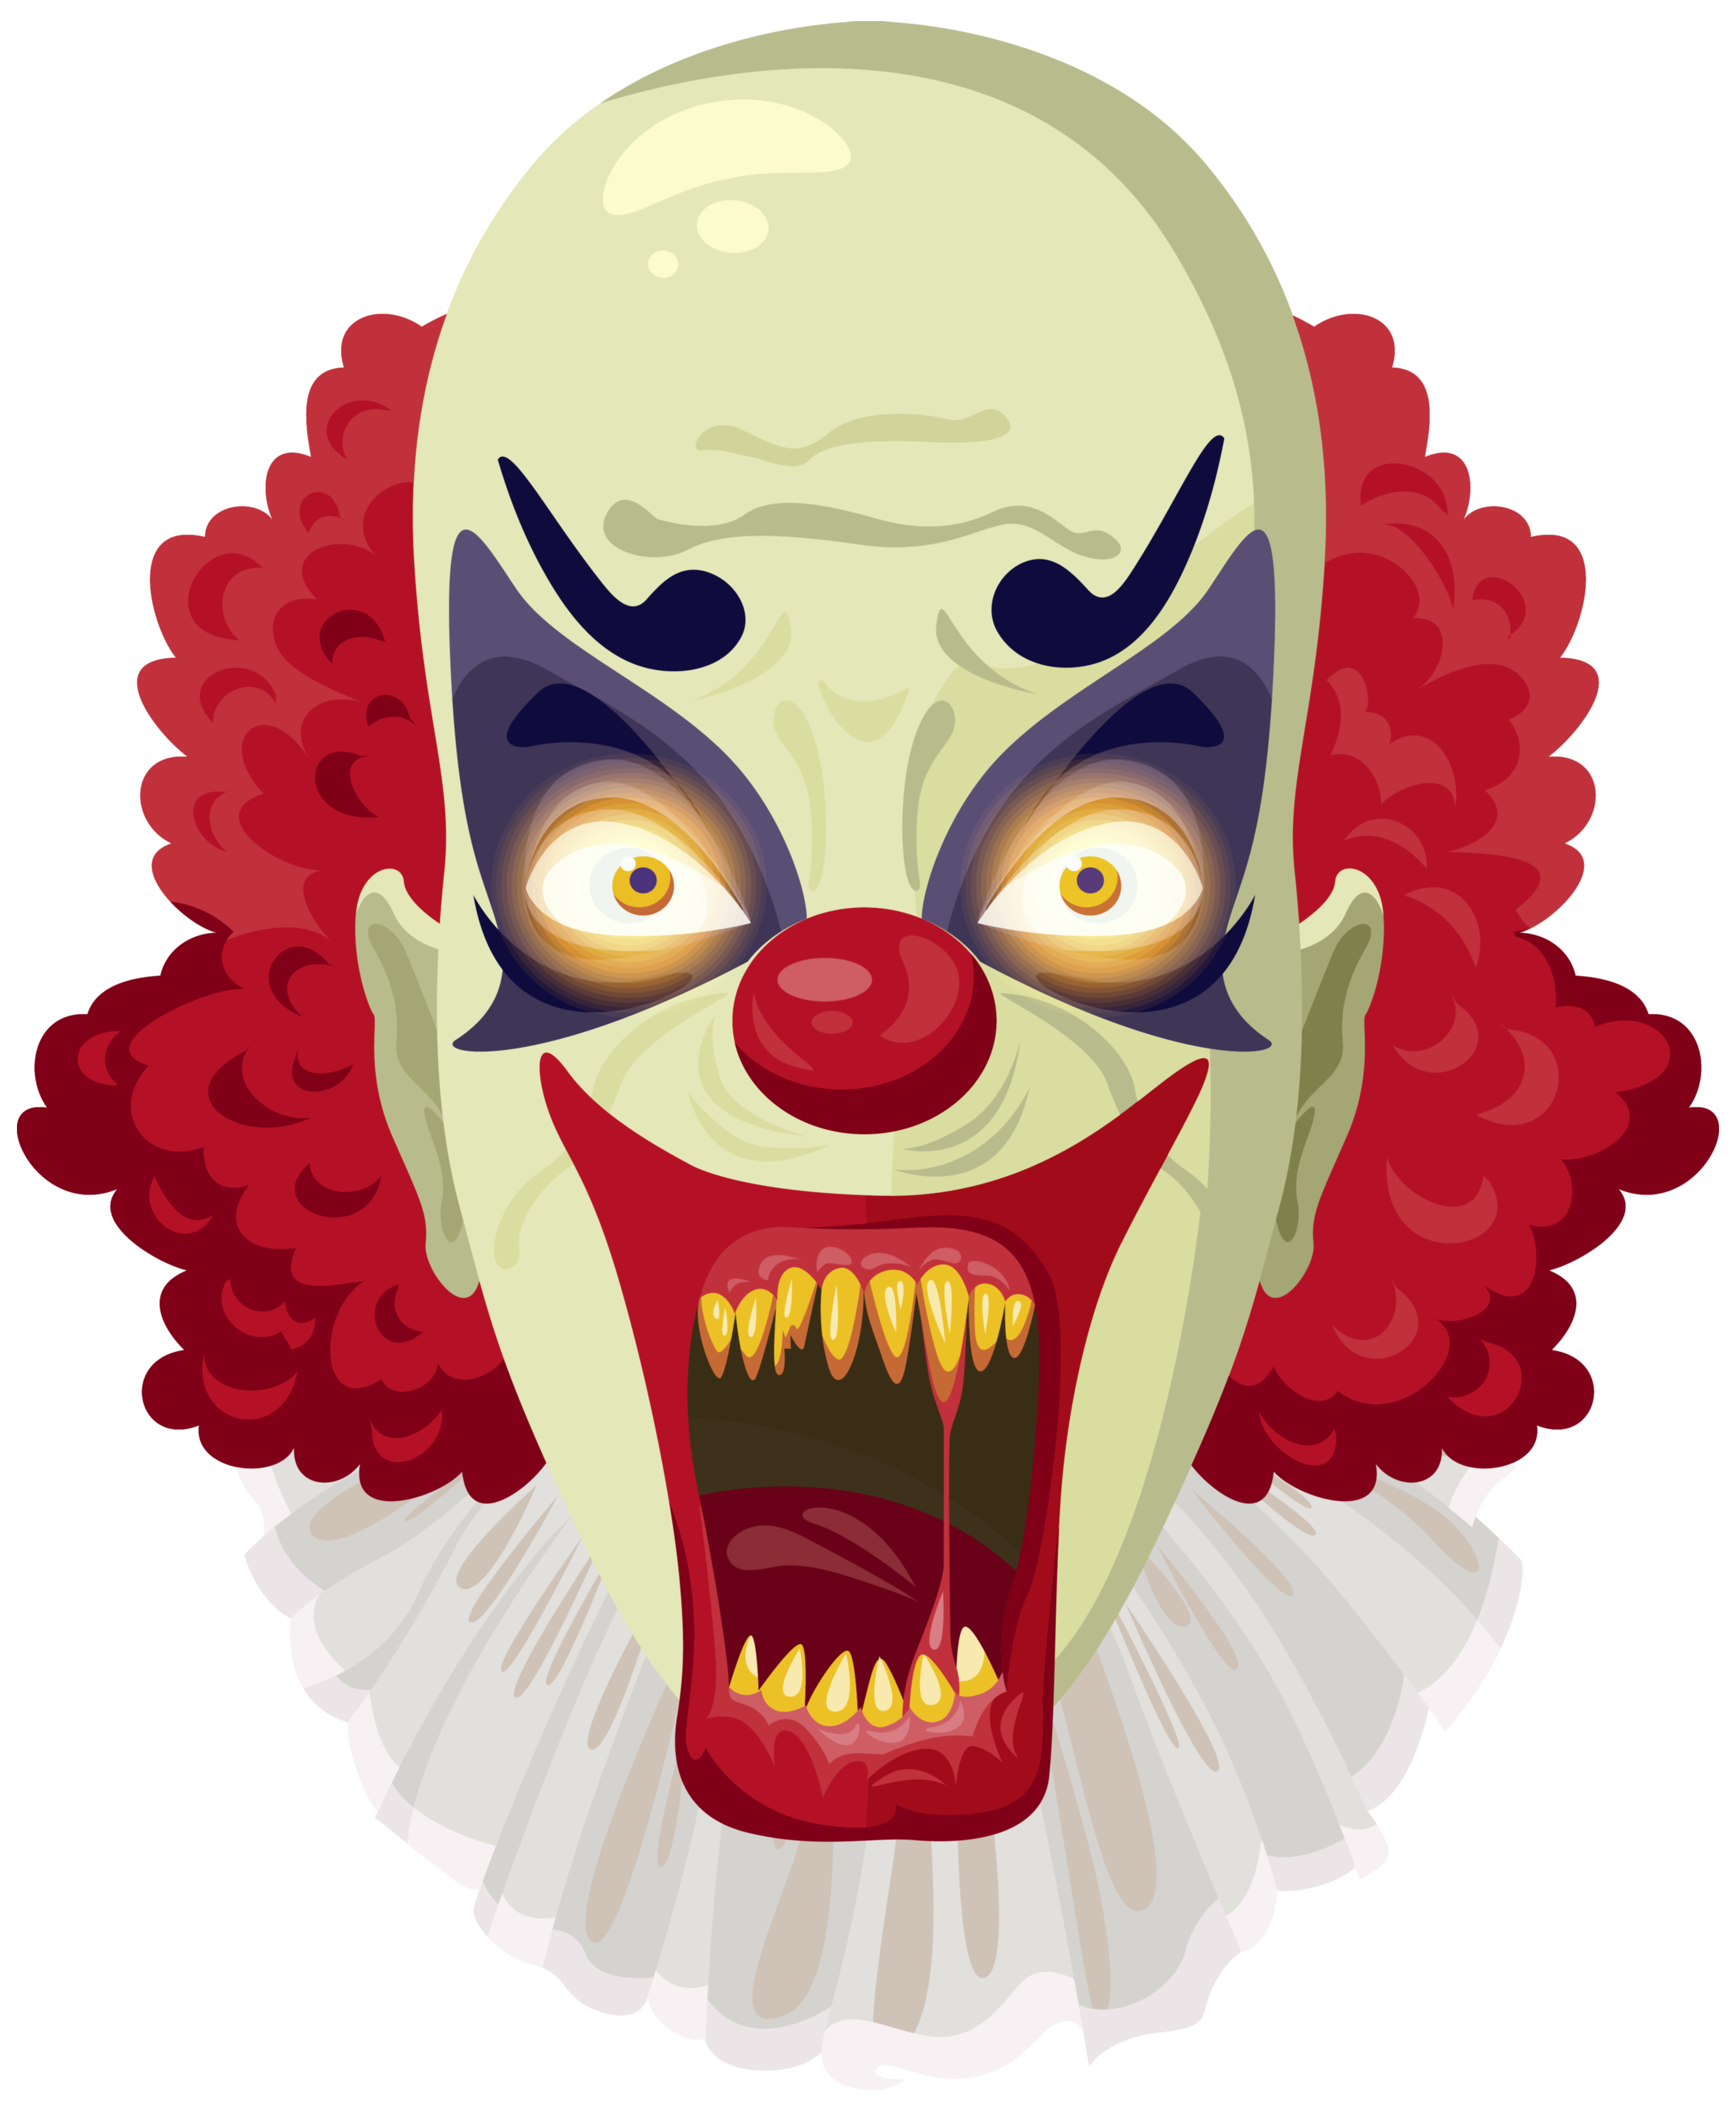 Scary Clown Clipart & Scary Clown Clip Art Images.